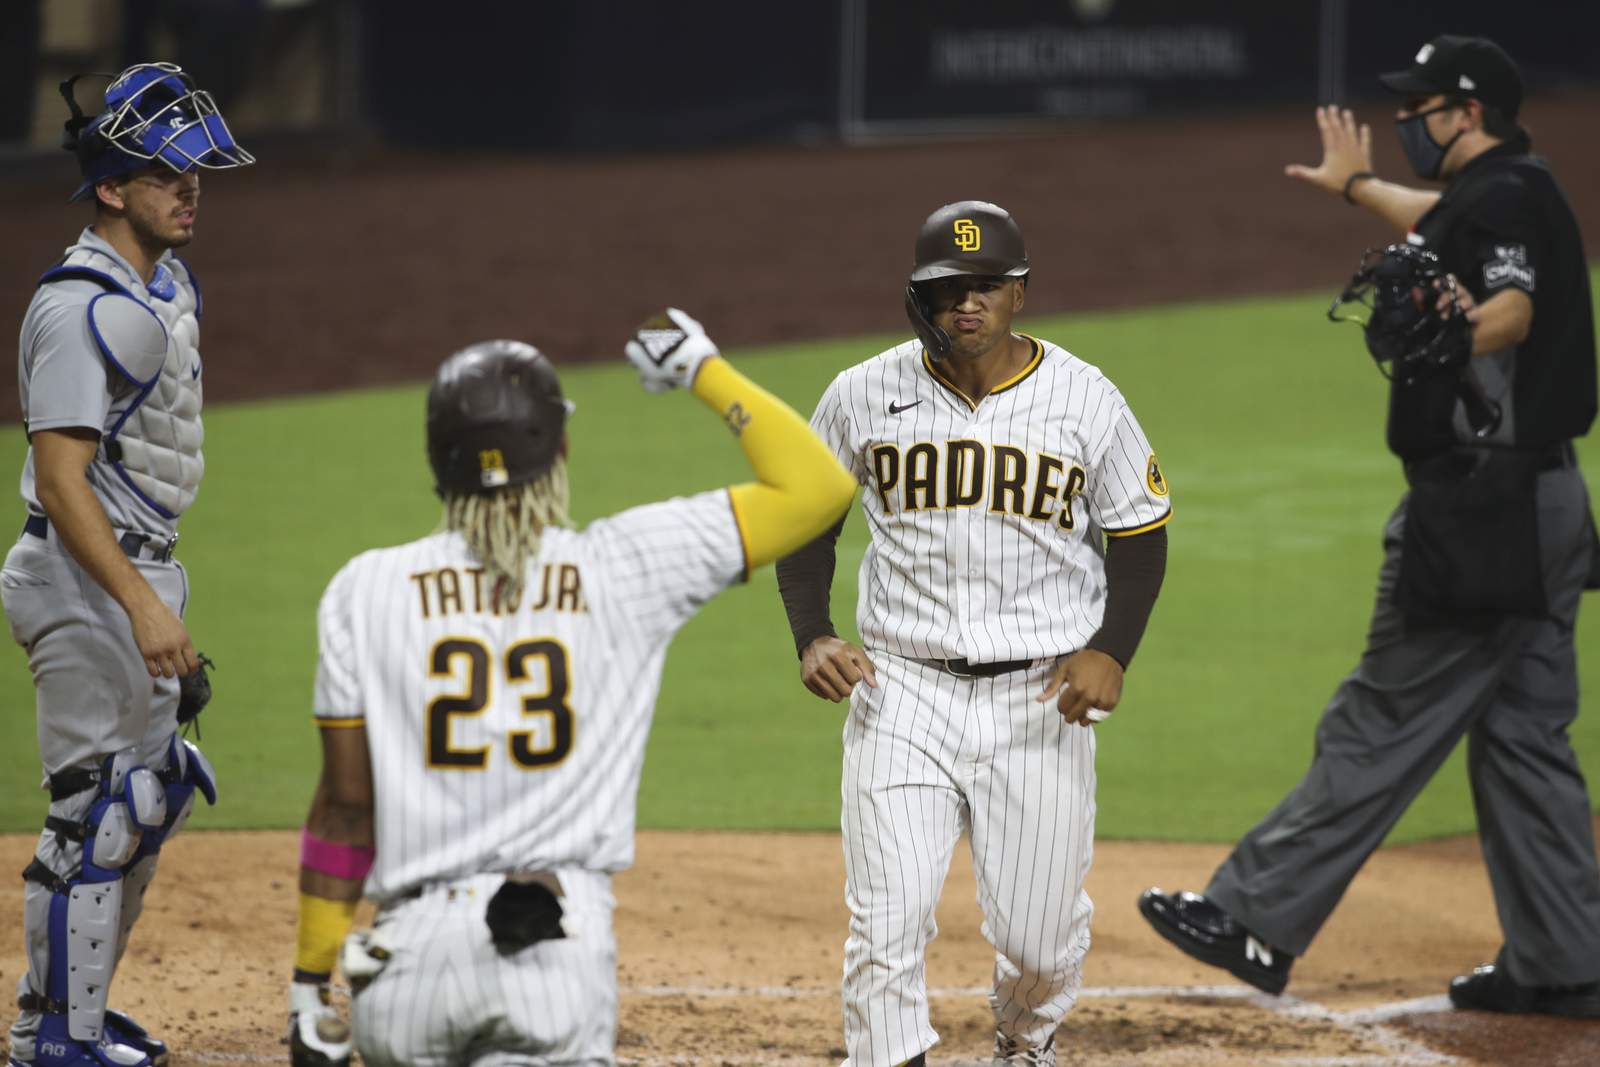 Padres, Cruising Thanks to Darvish, 4 Home Runs, Stun Mets in Wild Card  Series with 7-1 Win - Times of San Diego